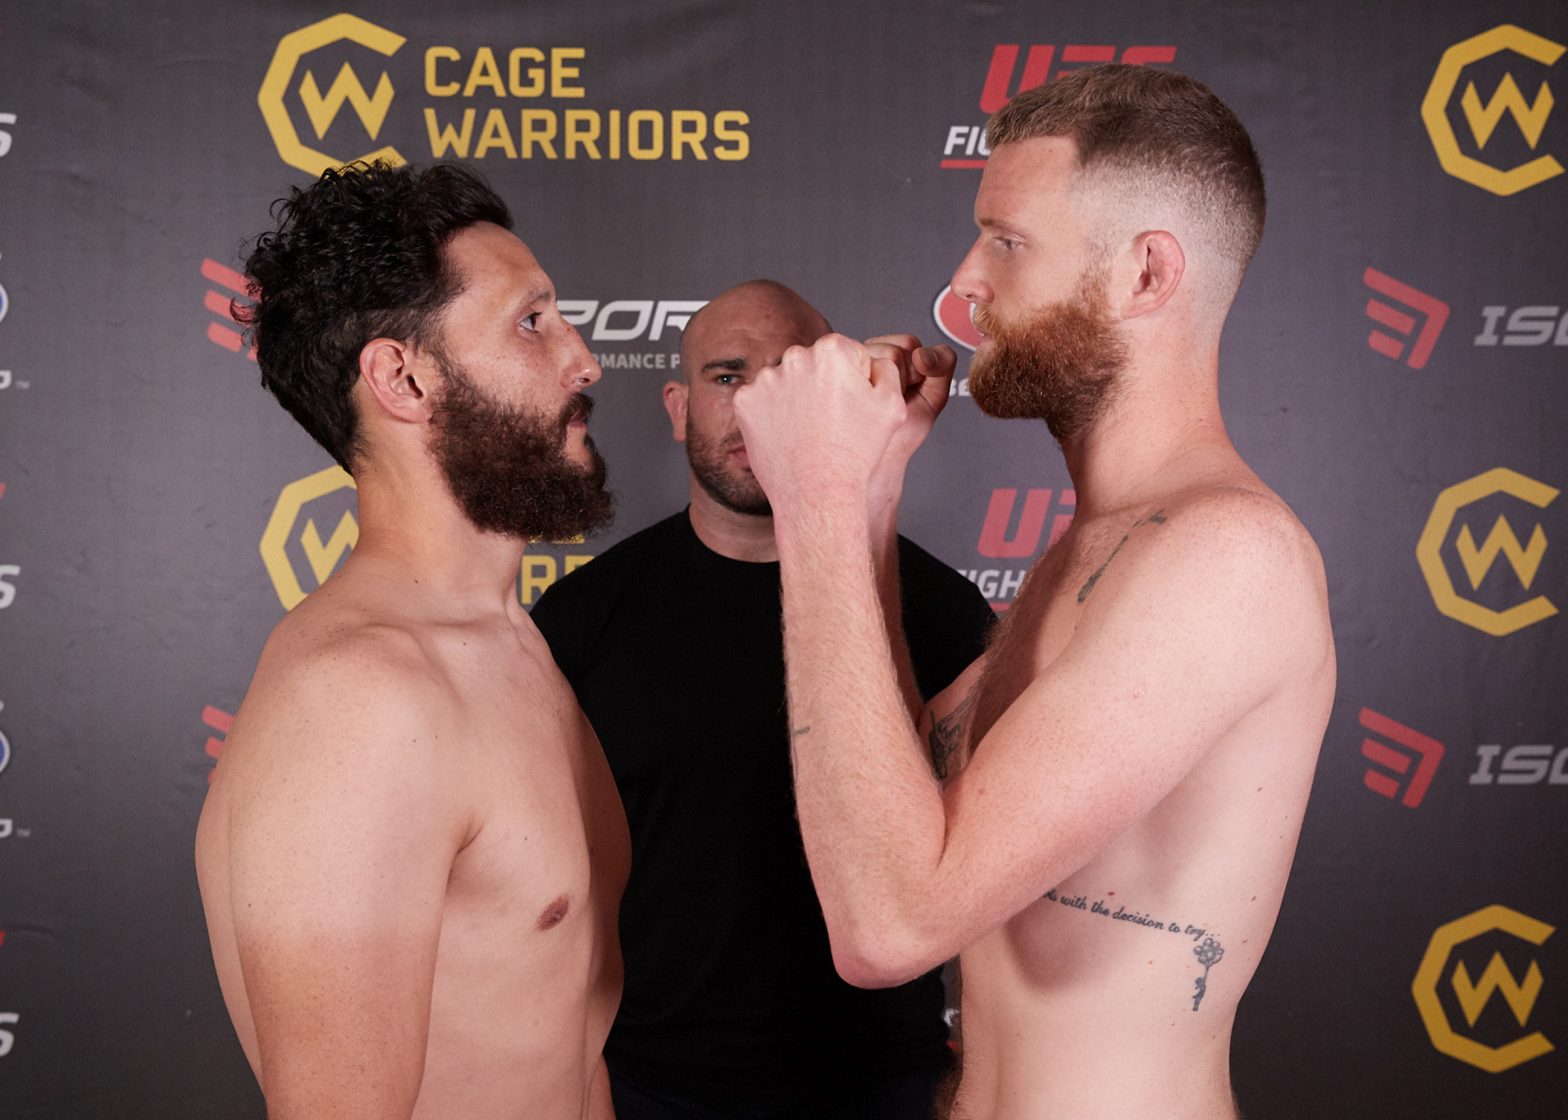 Cage Warriors 135 Weigh-in Results: All Fighters Make Weight